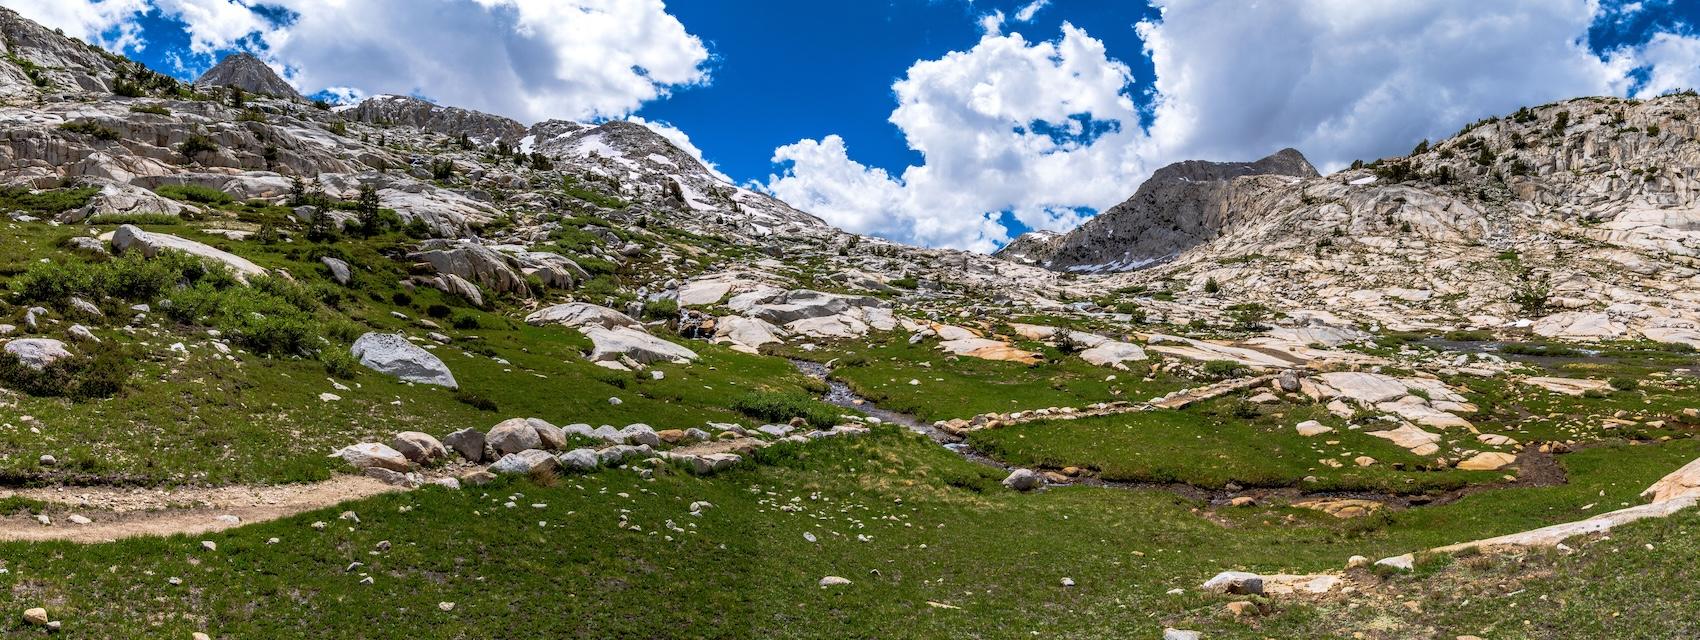 Green meadow in the Evolution Basin of Kings Canyon National Park